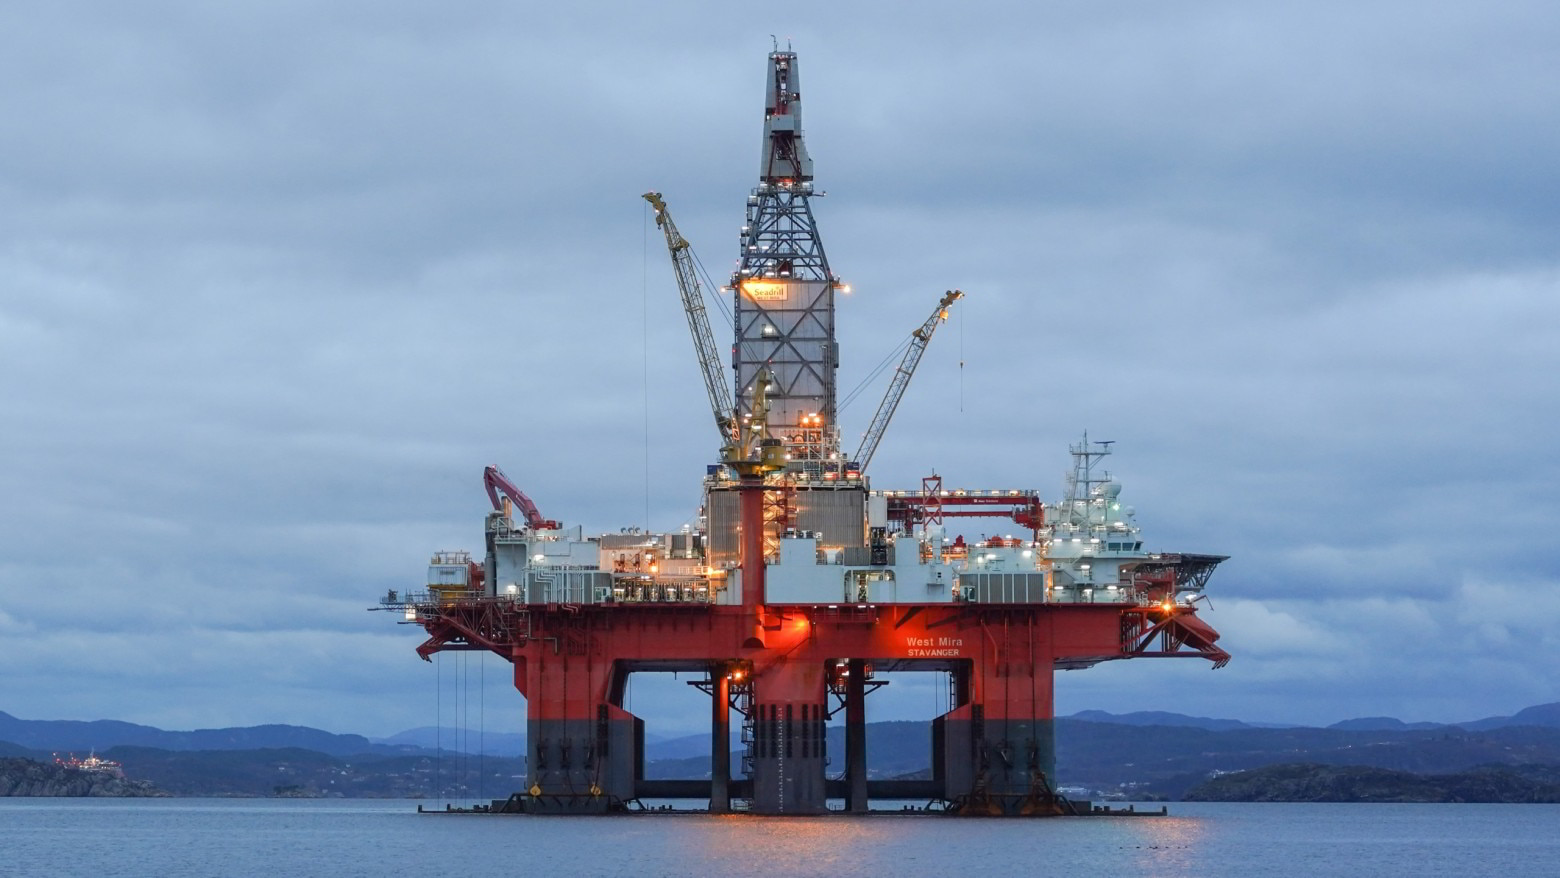 Deepsea Mira rig; Source: Odfjell Drilling